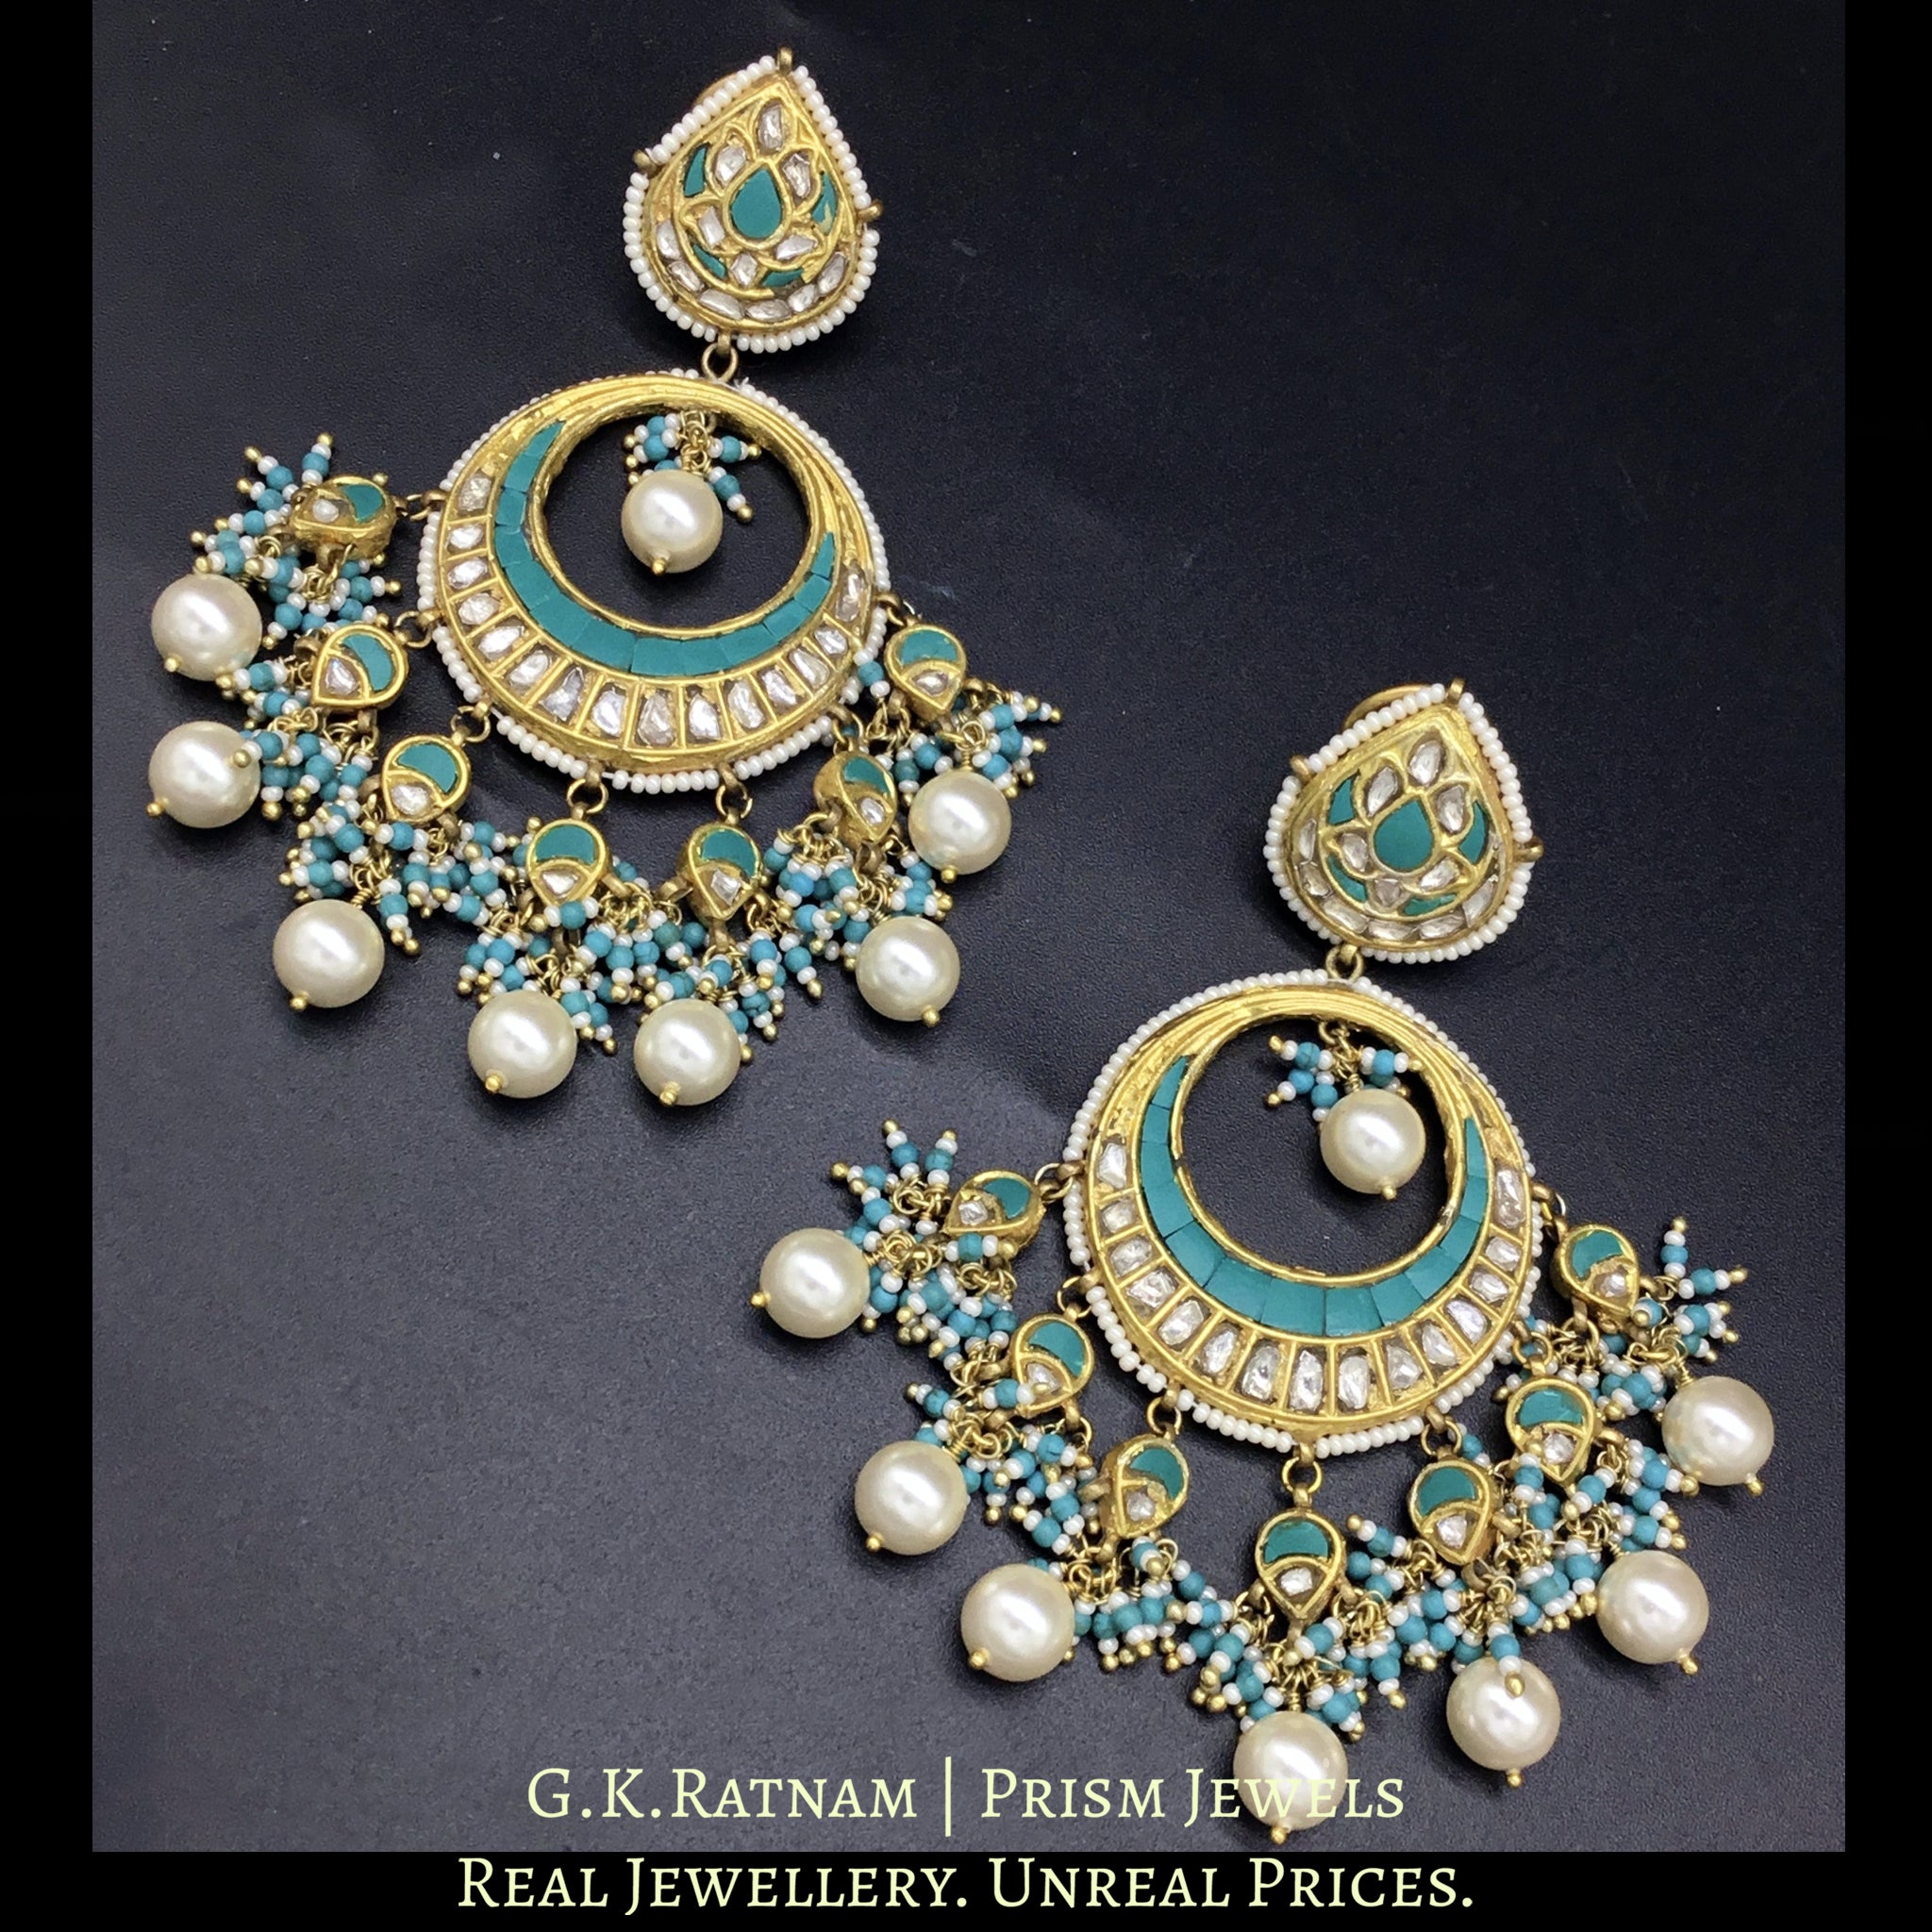 23k Gold and Diamond Polki Chand Bali Earring Pair with Turquoise Setting